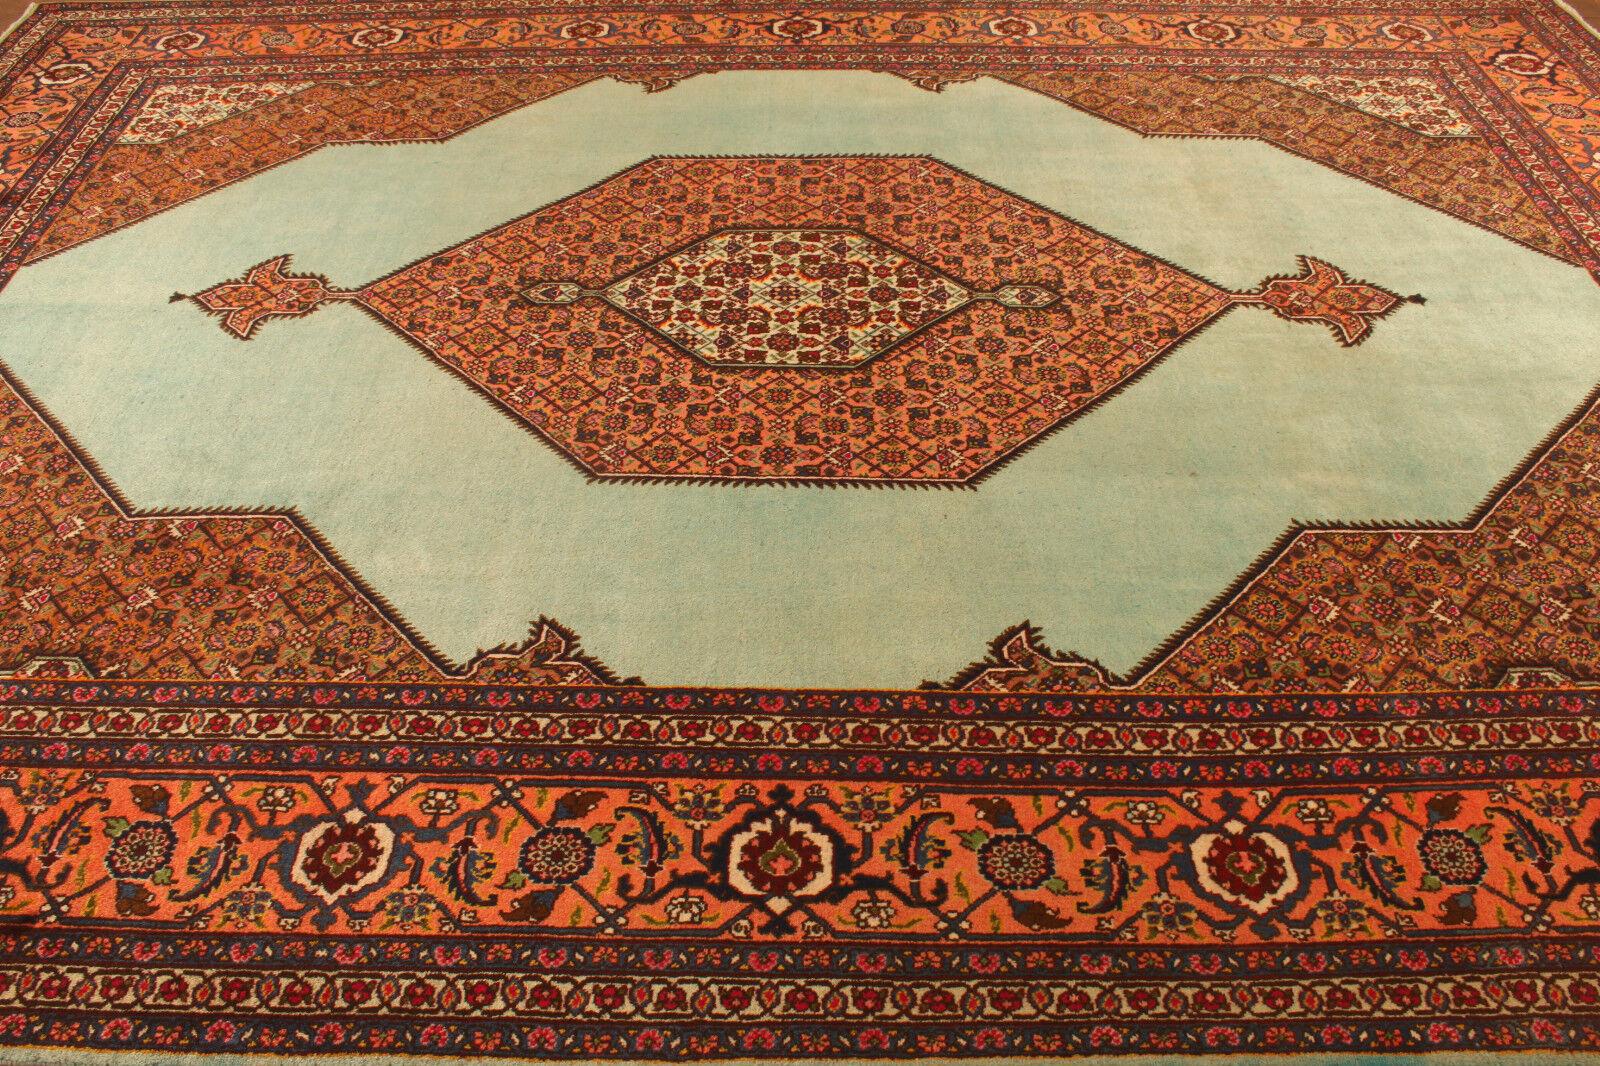 Handmade Vintage Persian Style Tabriz Rug 9.6' x 13.2', 1970s - 1T42 For Sale 2